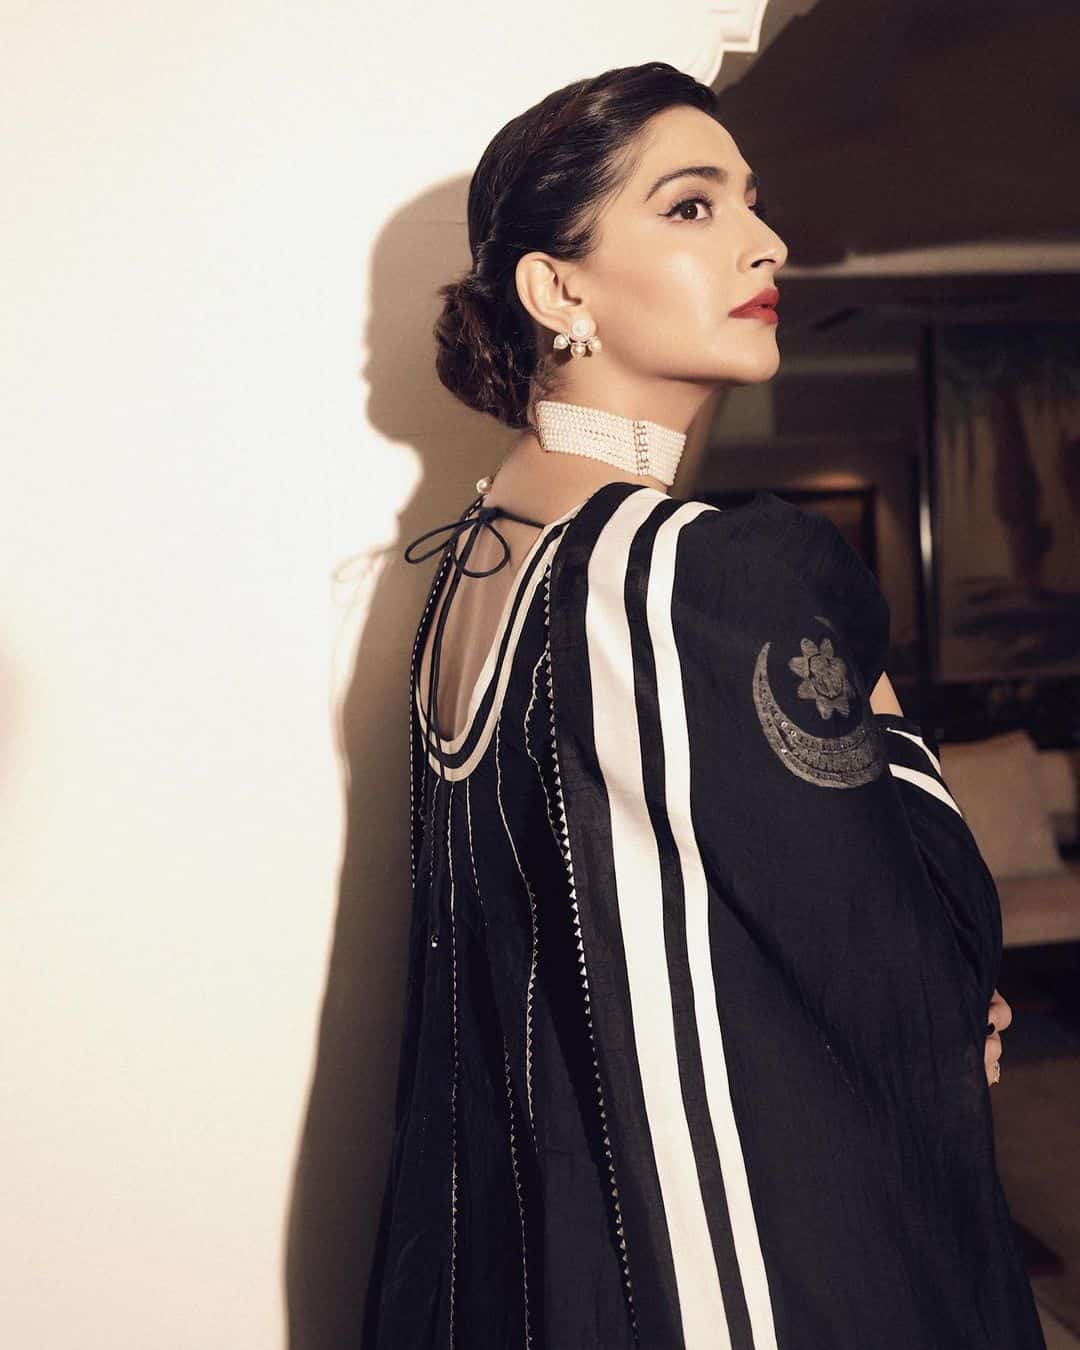 Sonam Kapoor In Glam Black Outfits